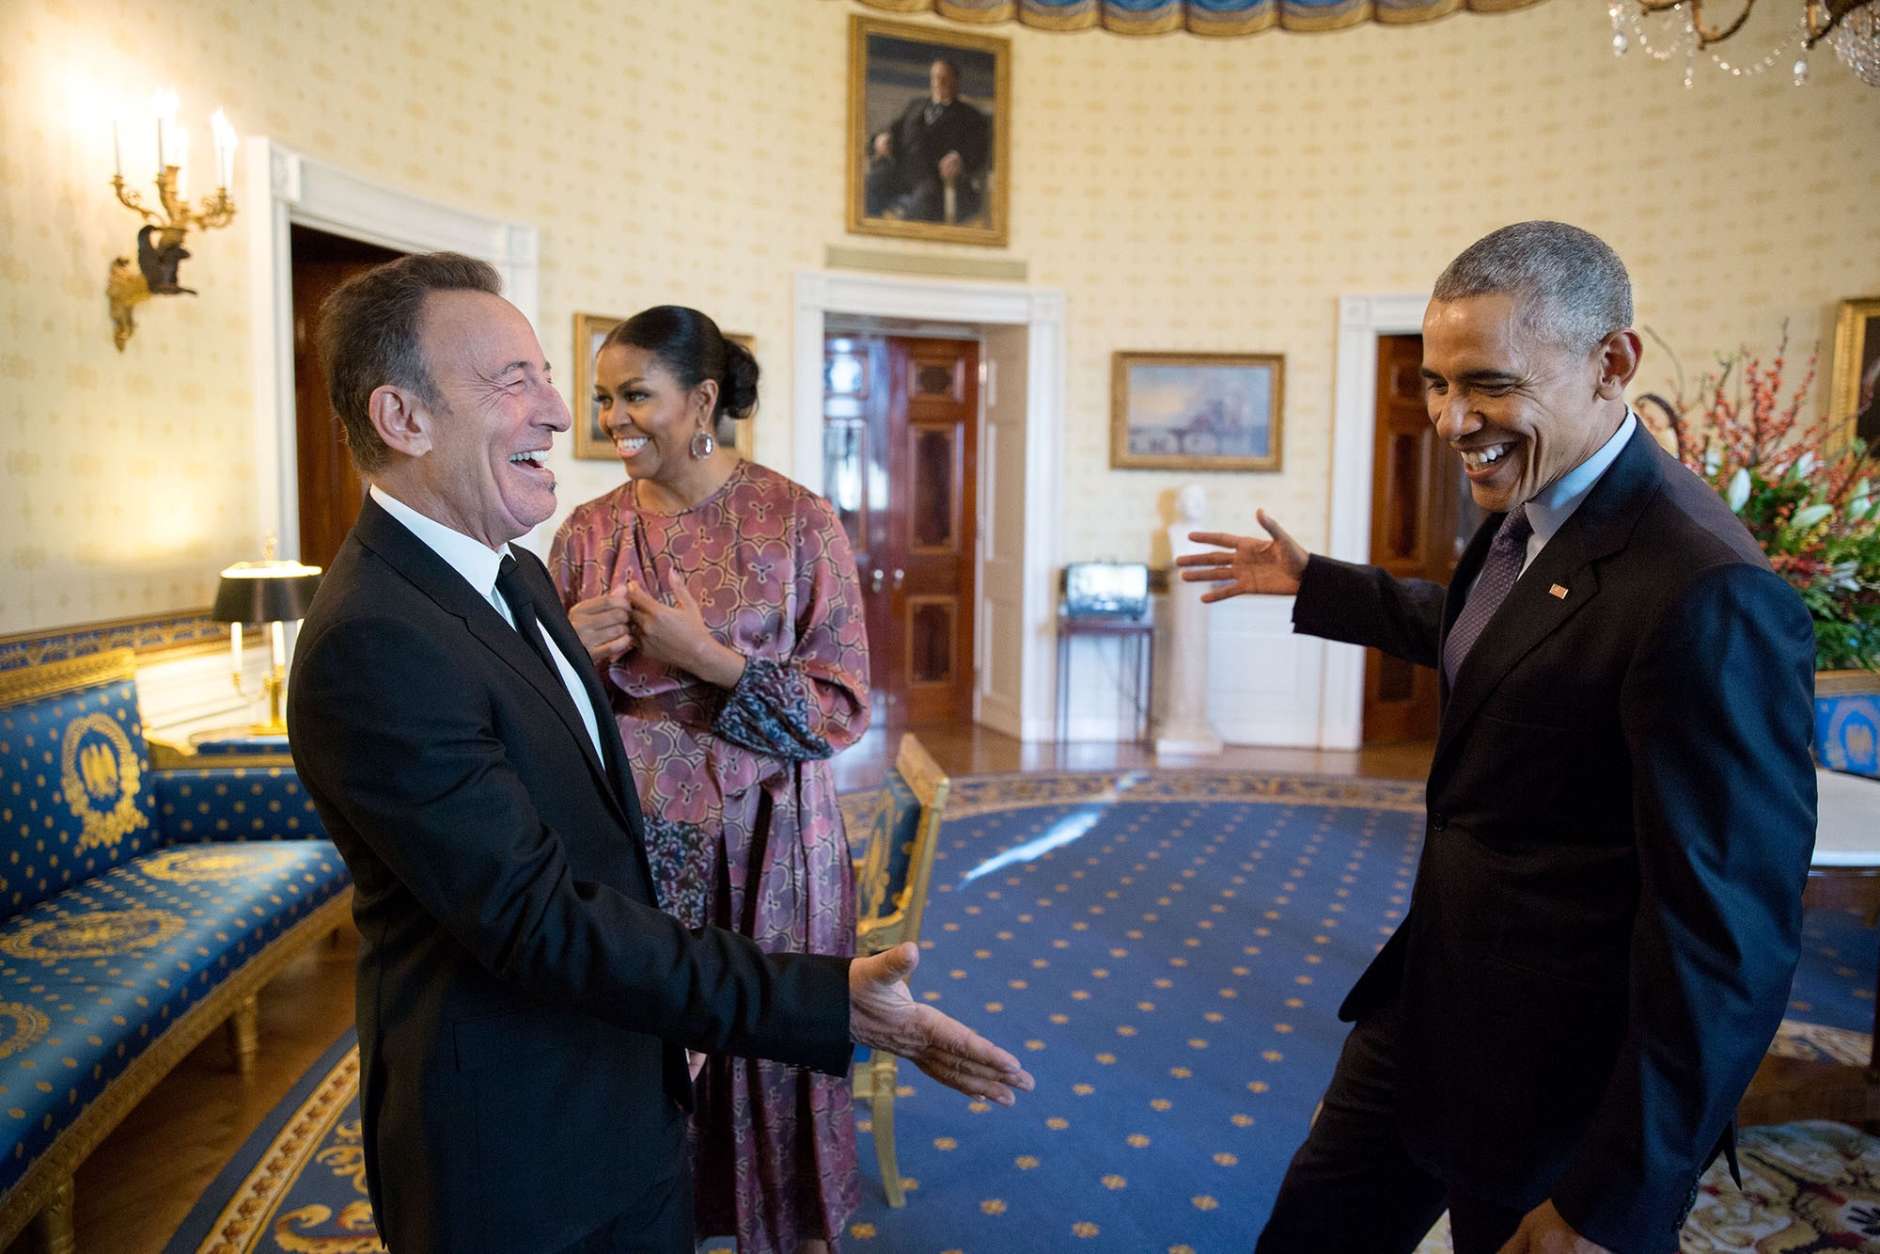 Nov. 22, 2016
“Bruuuuuce! The President reaches out to shake hands with Bruce Springsteen in the Blue Room of the White House prior to the Presidential Medal of Freedom ceremony. I’m so happy for Bruce, having been a fan of his for almost 30 years during which I’ve seen at least 35 of his concerts.” (Official White House Photo by Pete Souza)